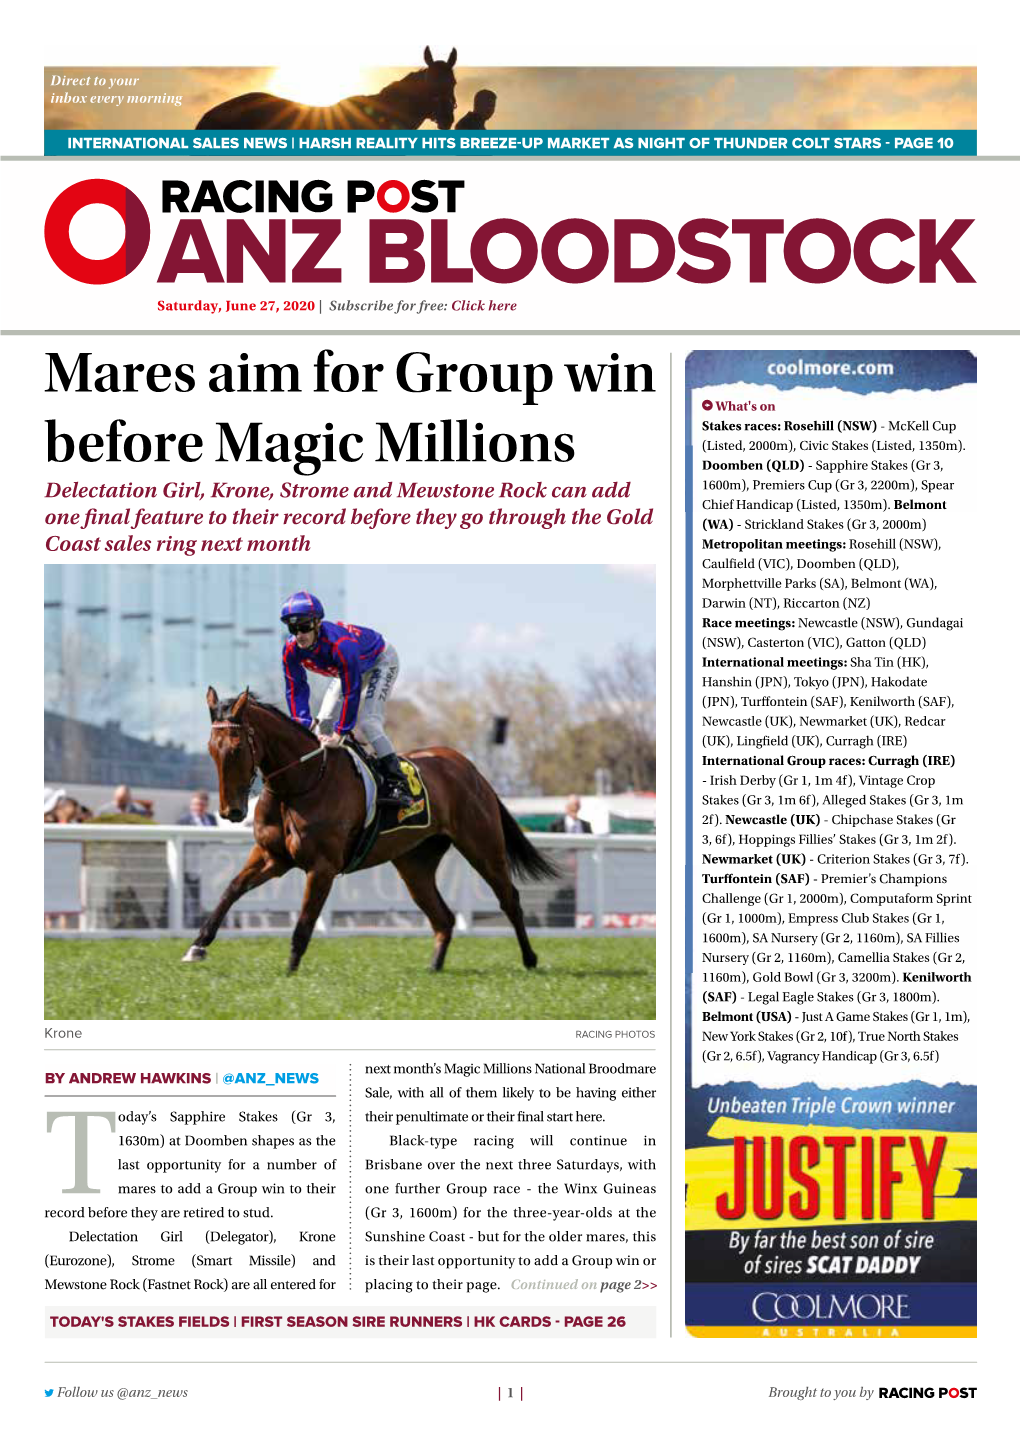 Mares Aim for Group Win Before Magic Millions | 2 | Saturday, June 27, 2020